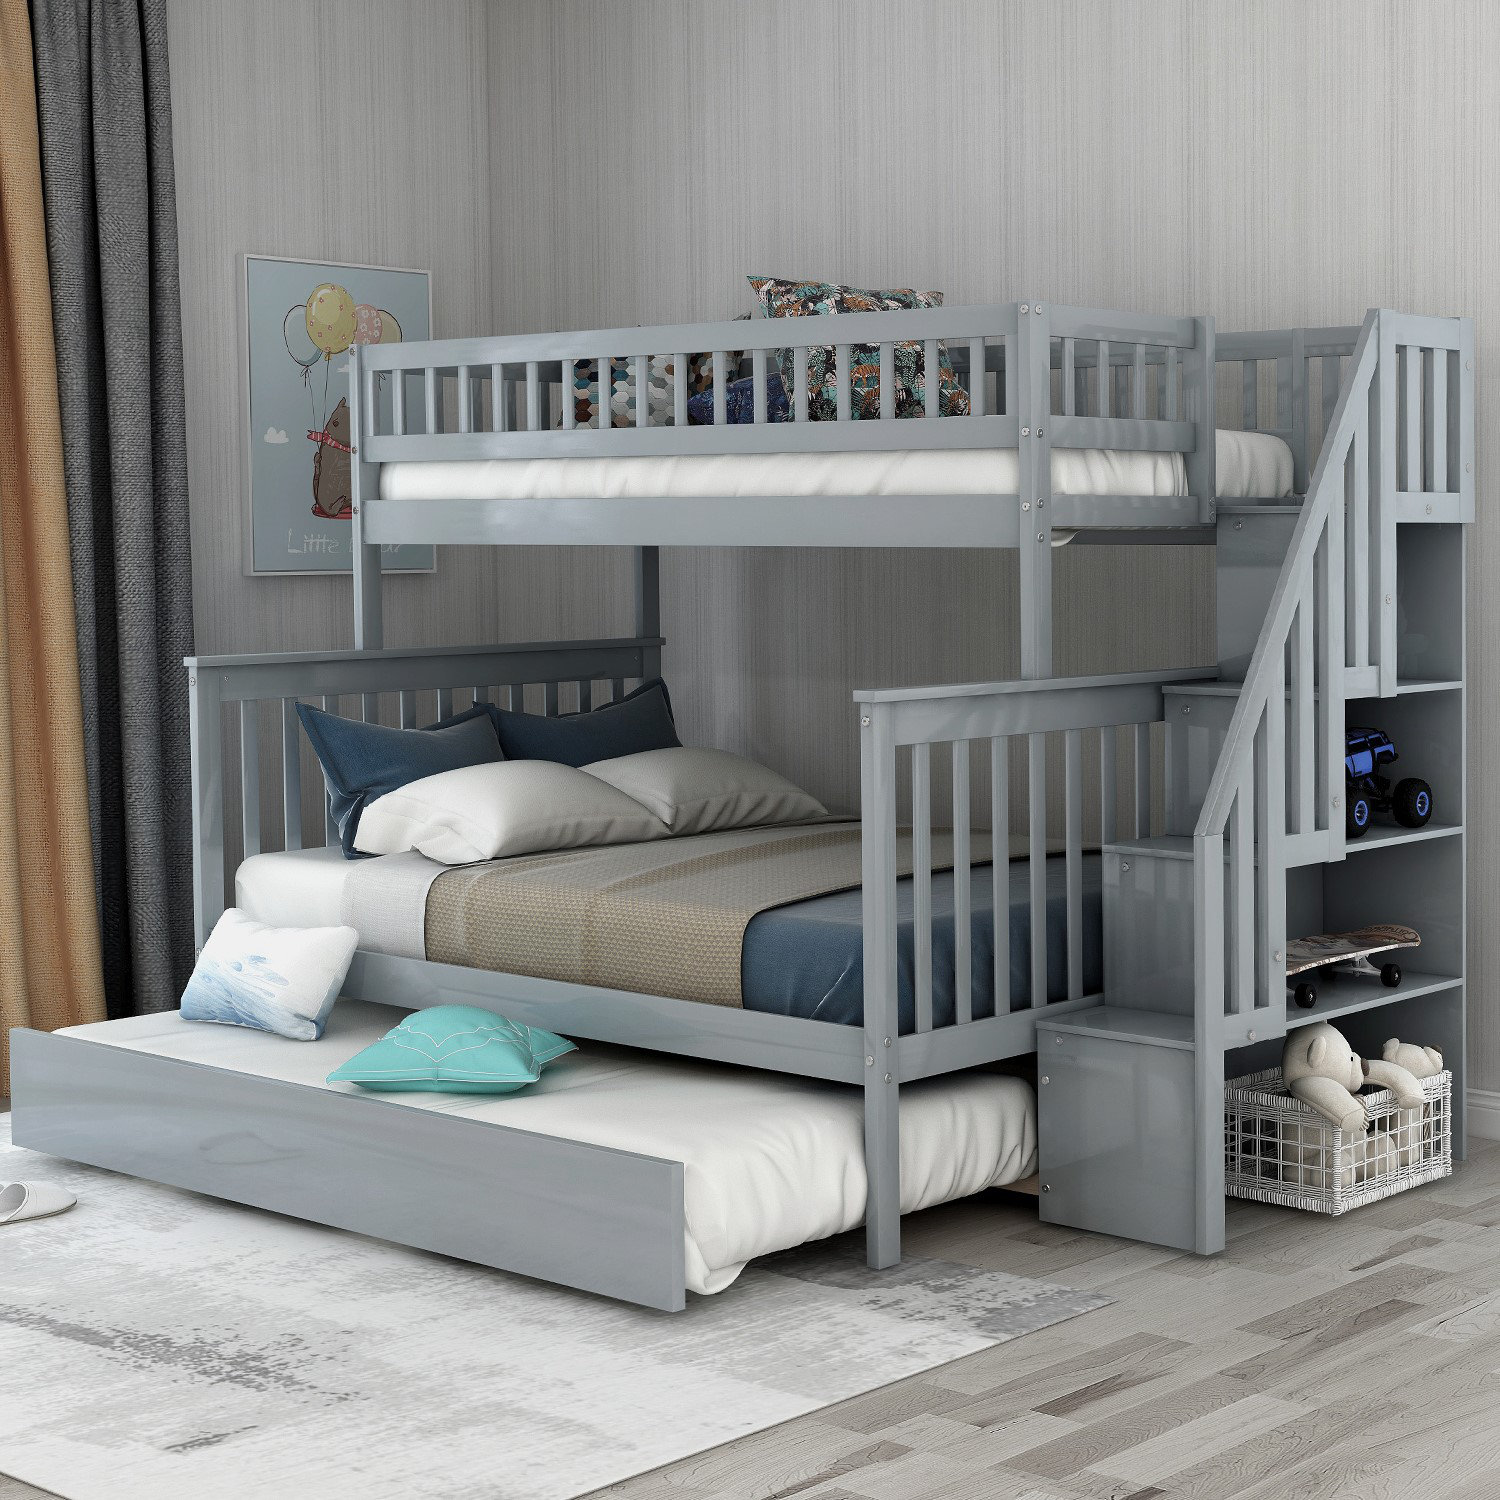 Hazzard Kids Twin Over Full Bunk Bed with Trundle